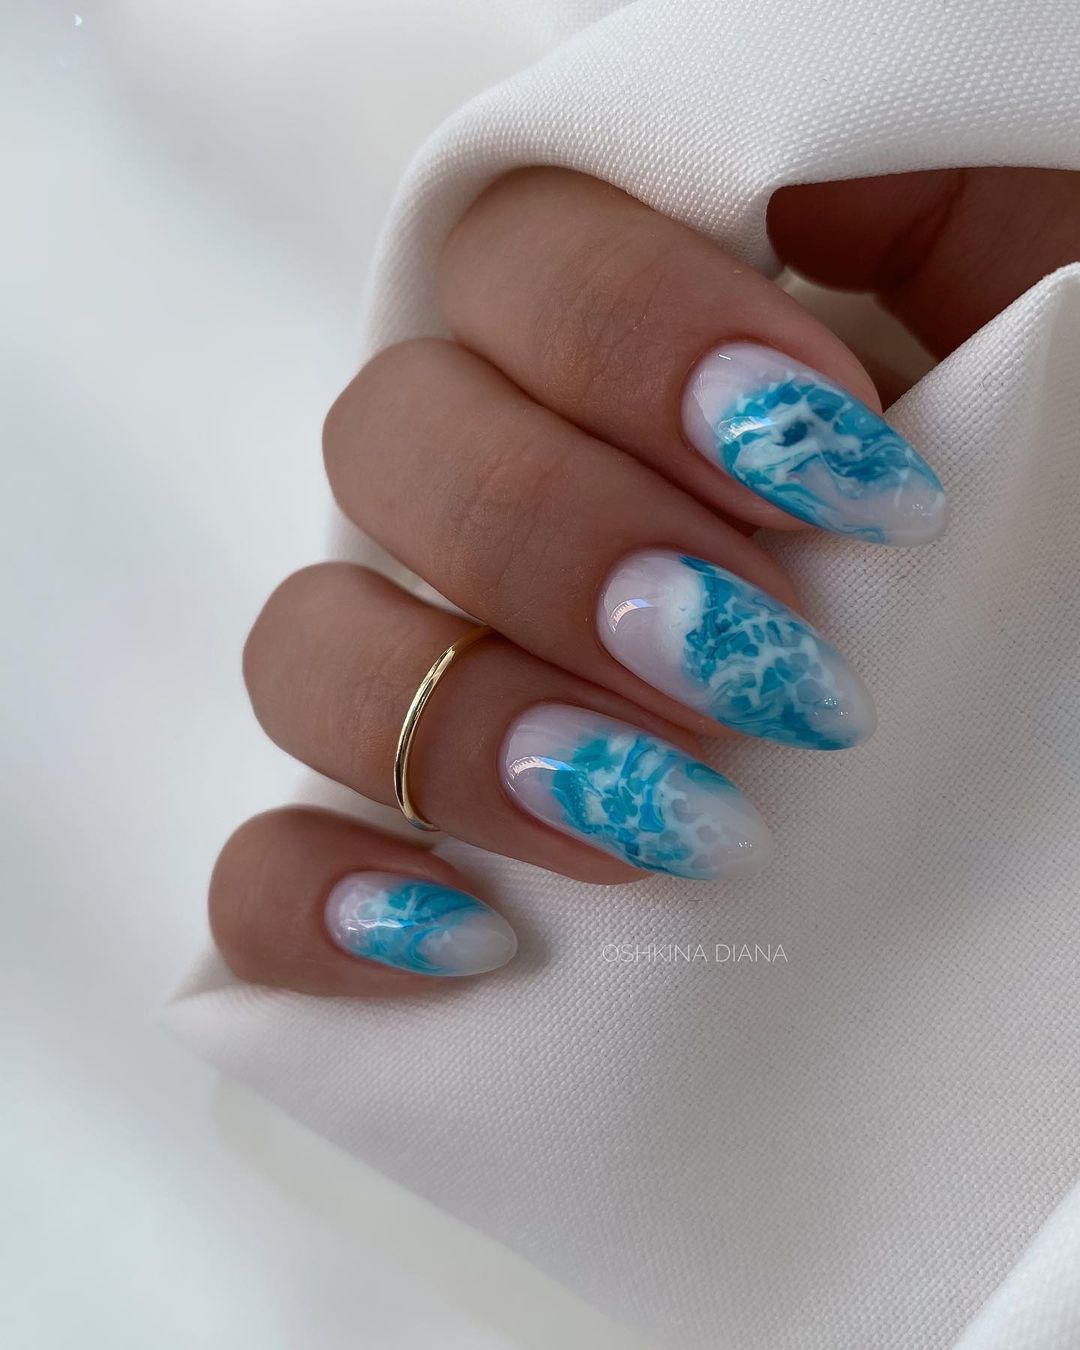 Round White Gel Nails with Blue Marble Design